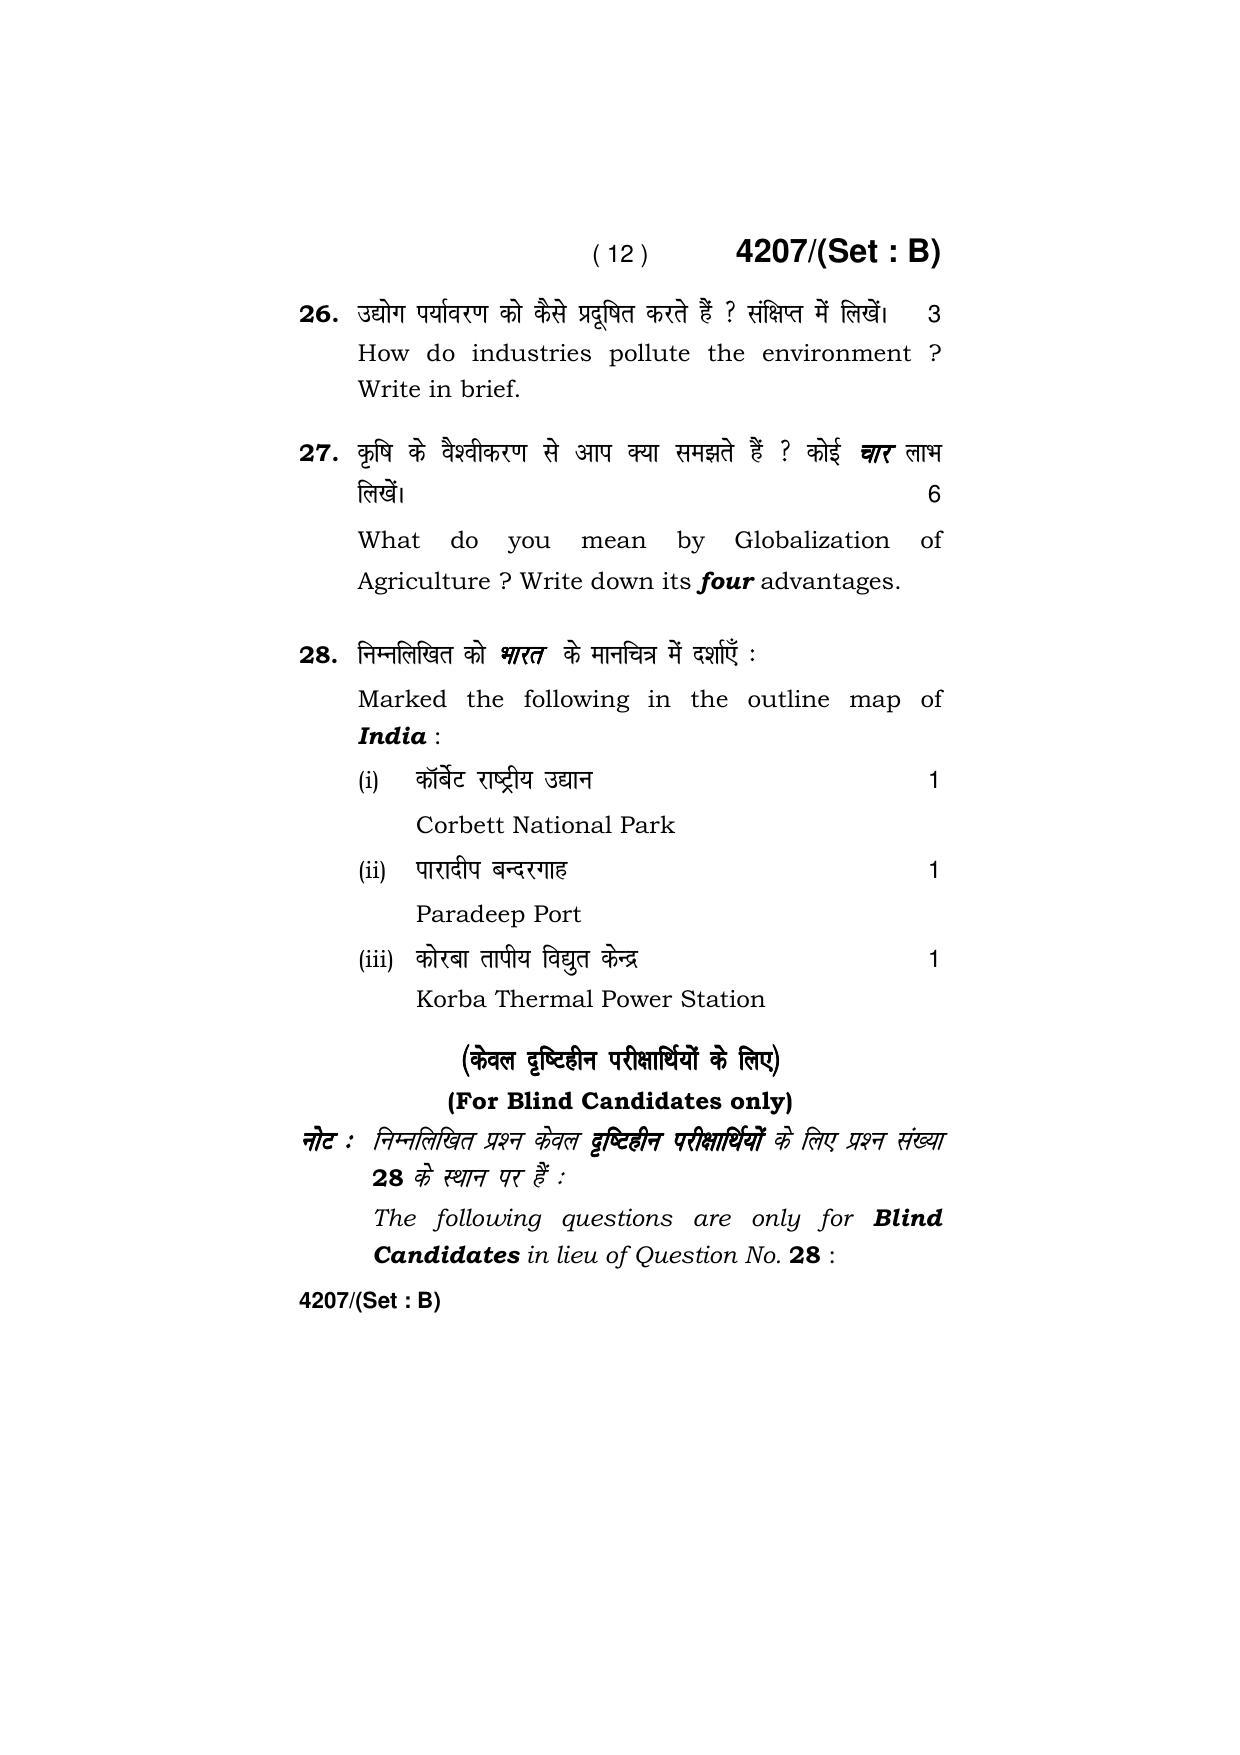 Haryana Board HBSE Class 10 Social Science (All Set) 2019 Question Paper - Page 27